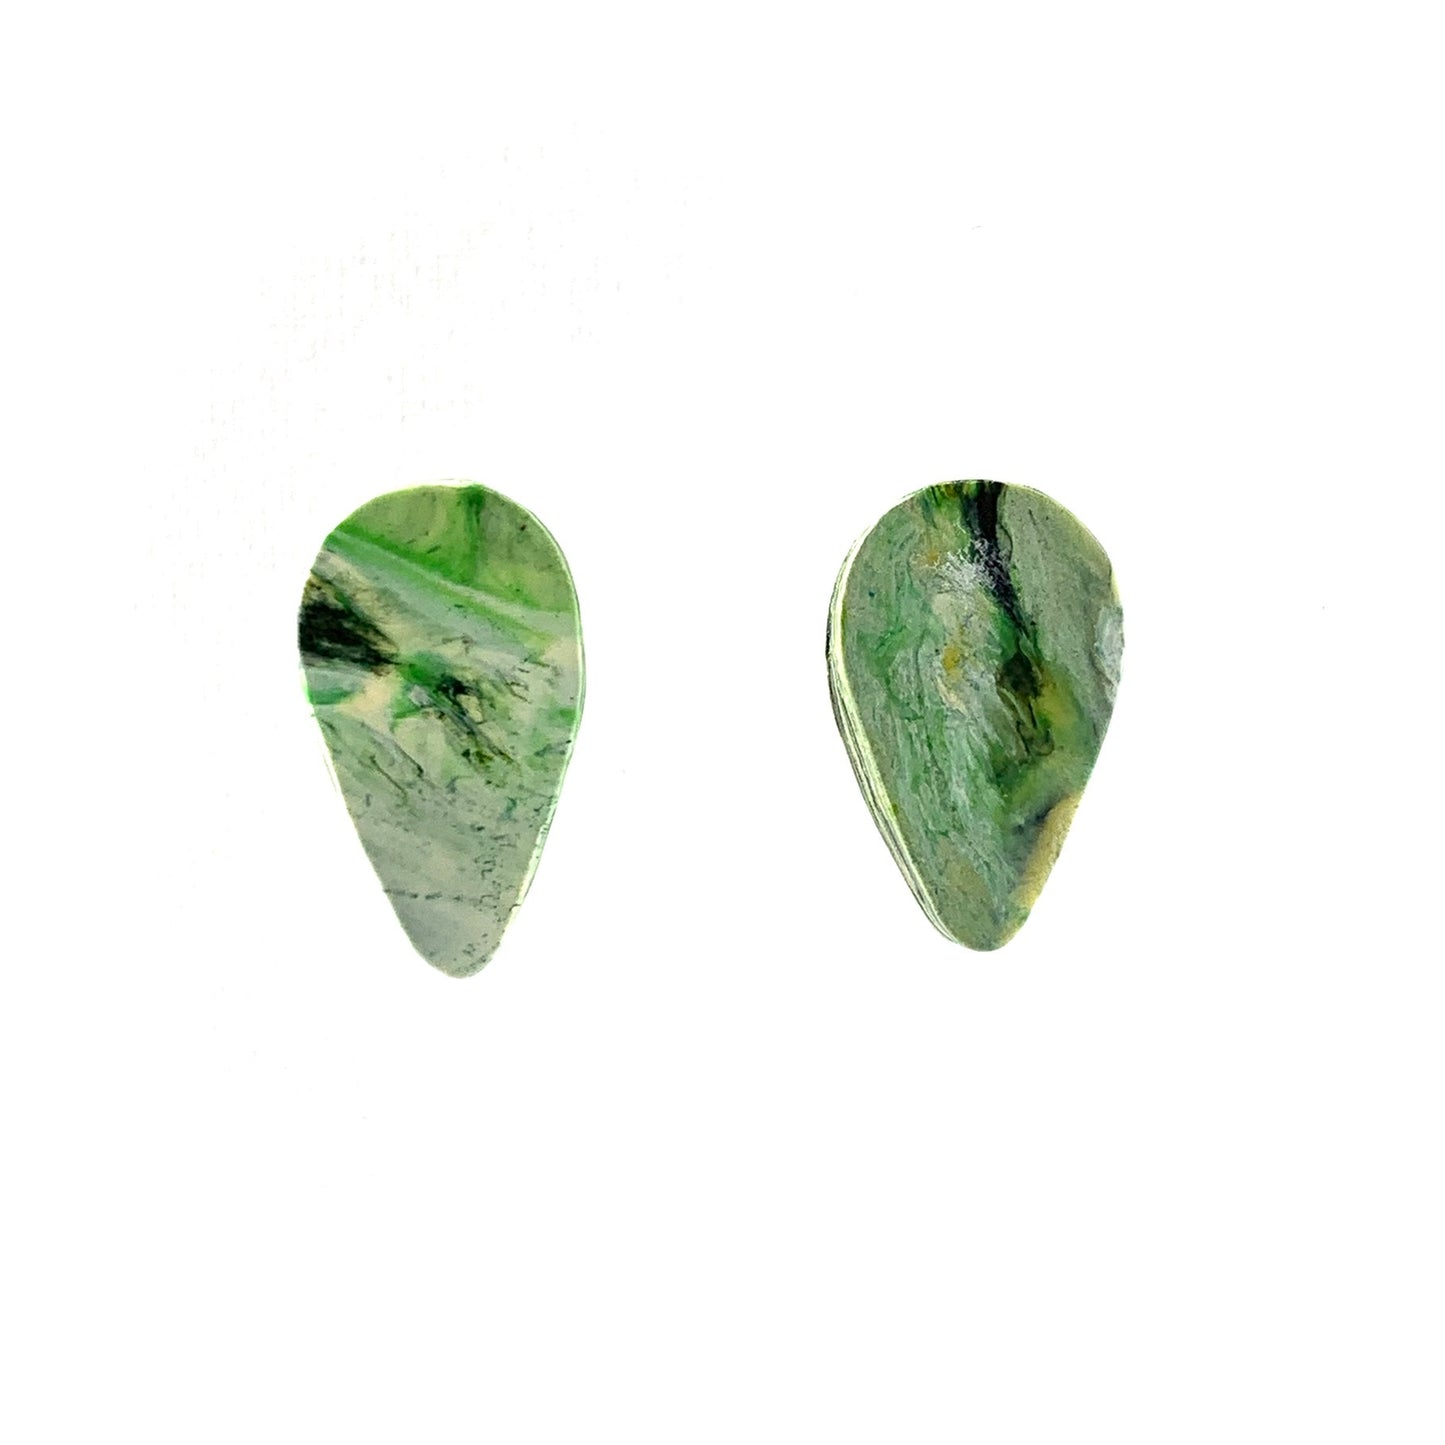 Handmade Sustainable Earrings Studs Made from Recycled Plastic Artesian Teardrops Gift for her